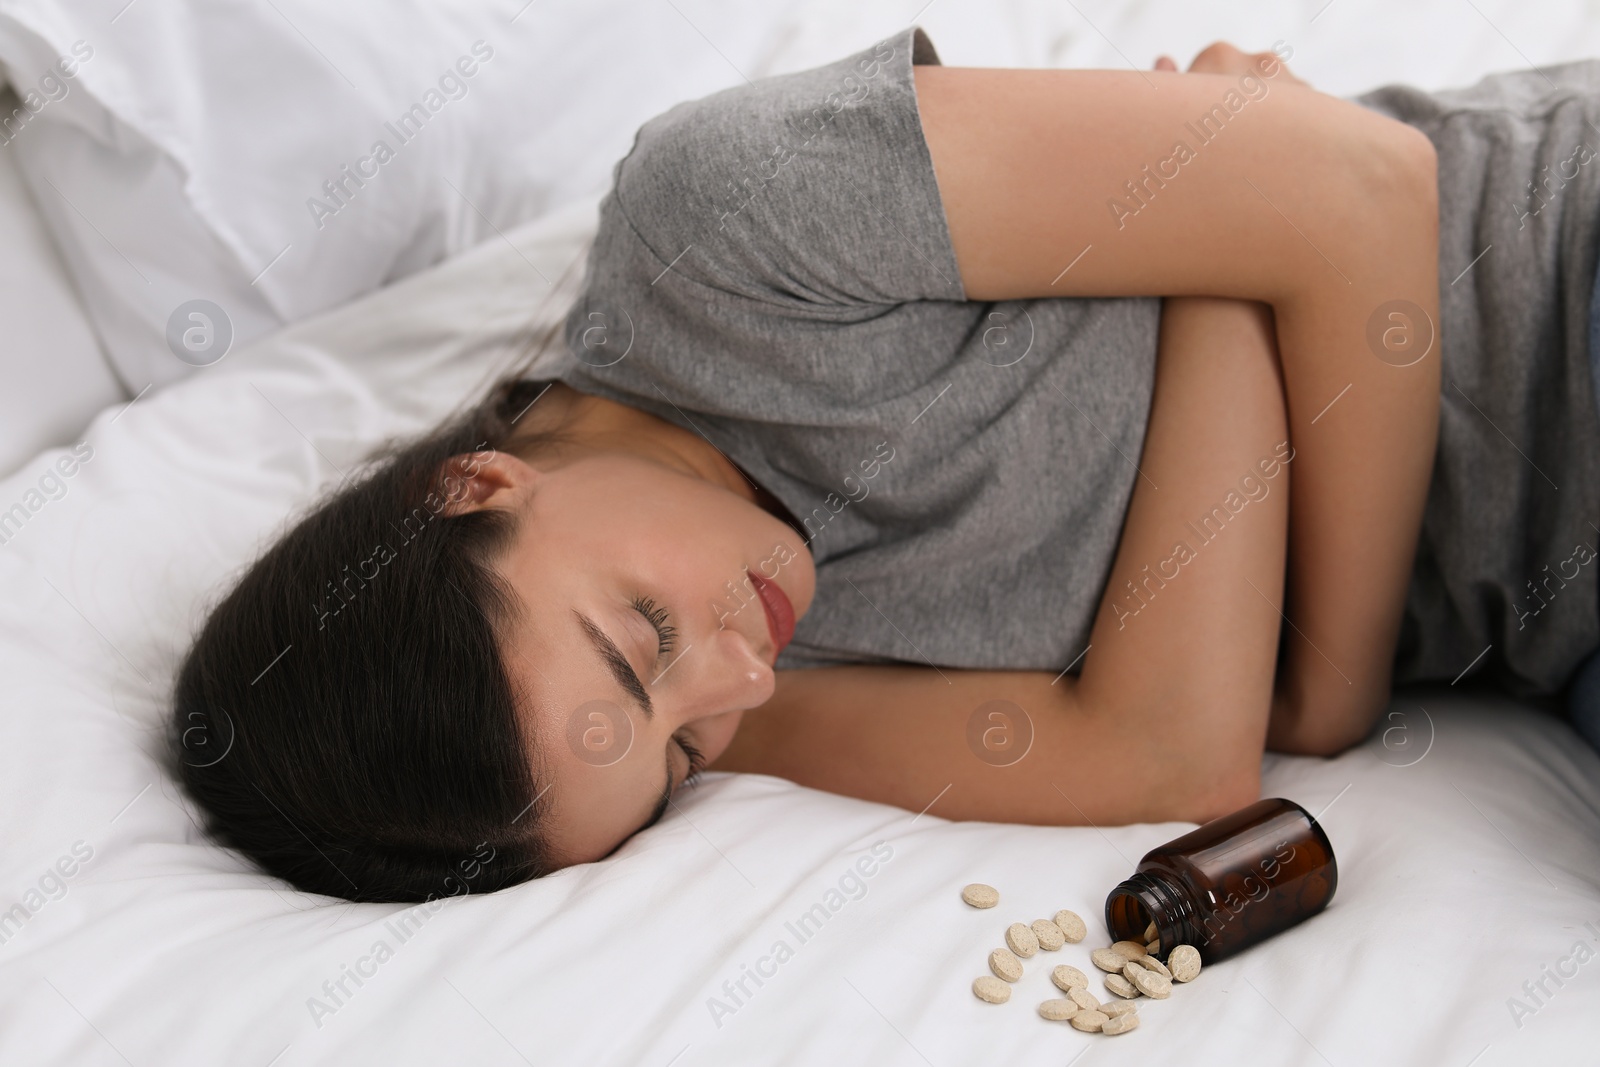 Photo of Woman sleeping on bed near overturned bottle with antidepressants